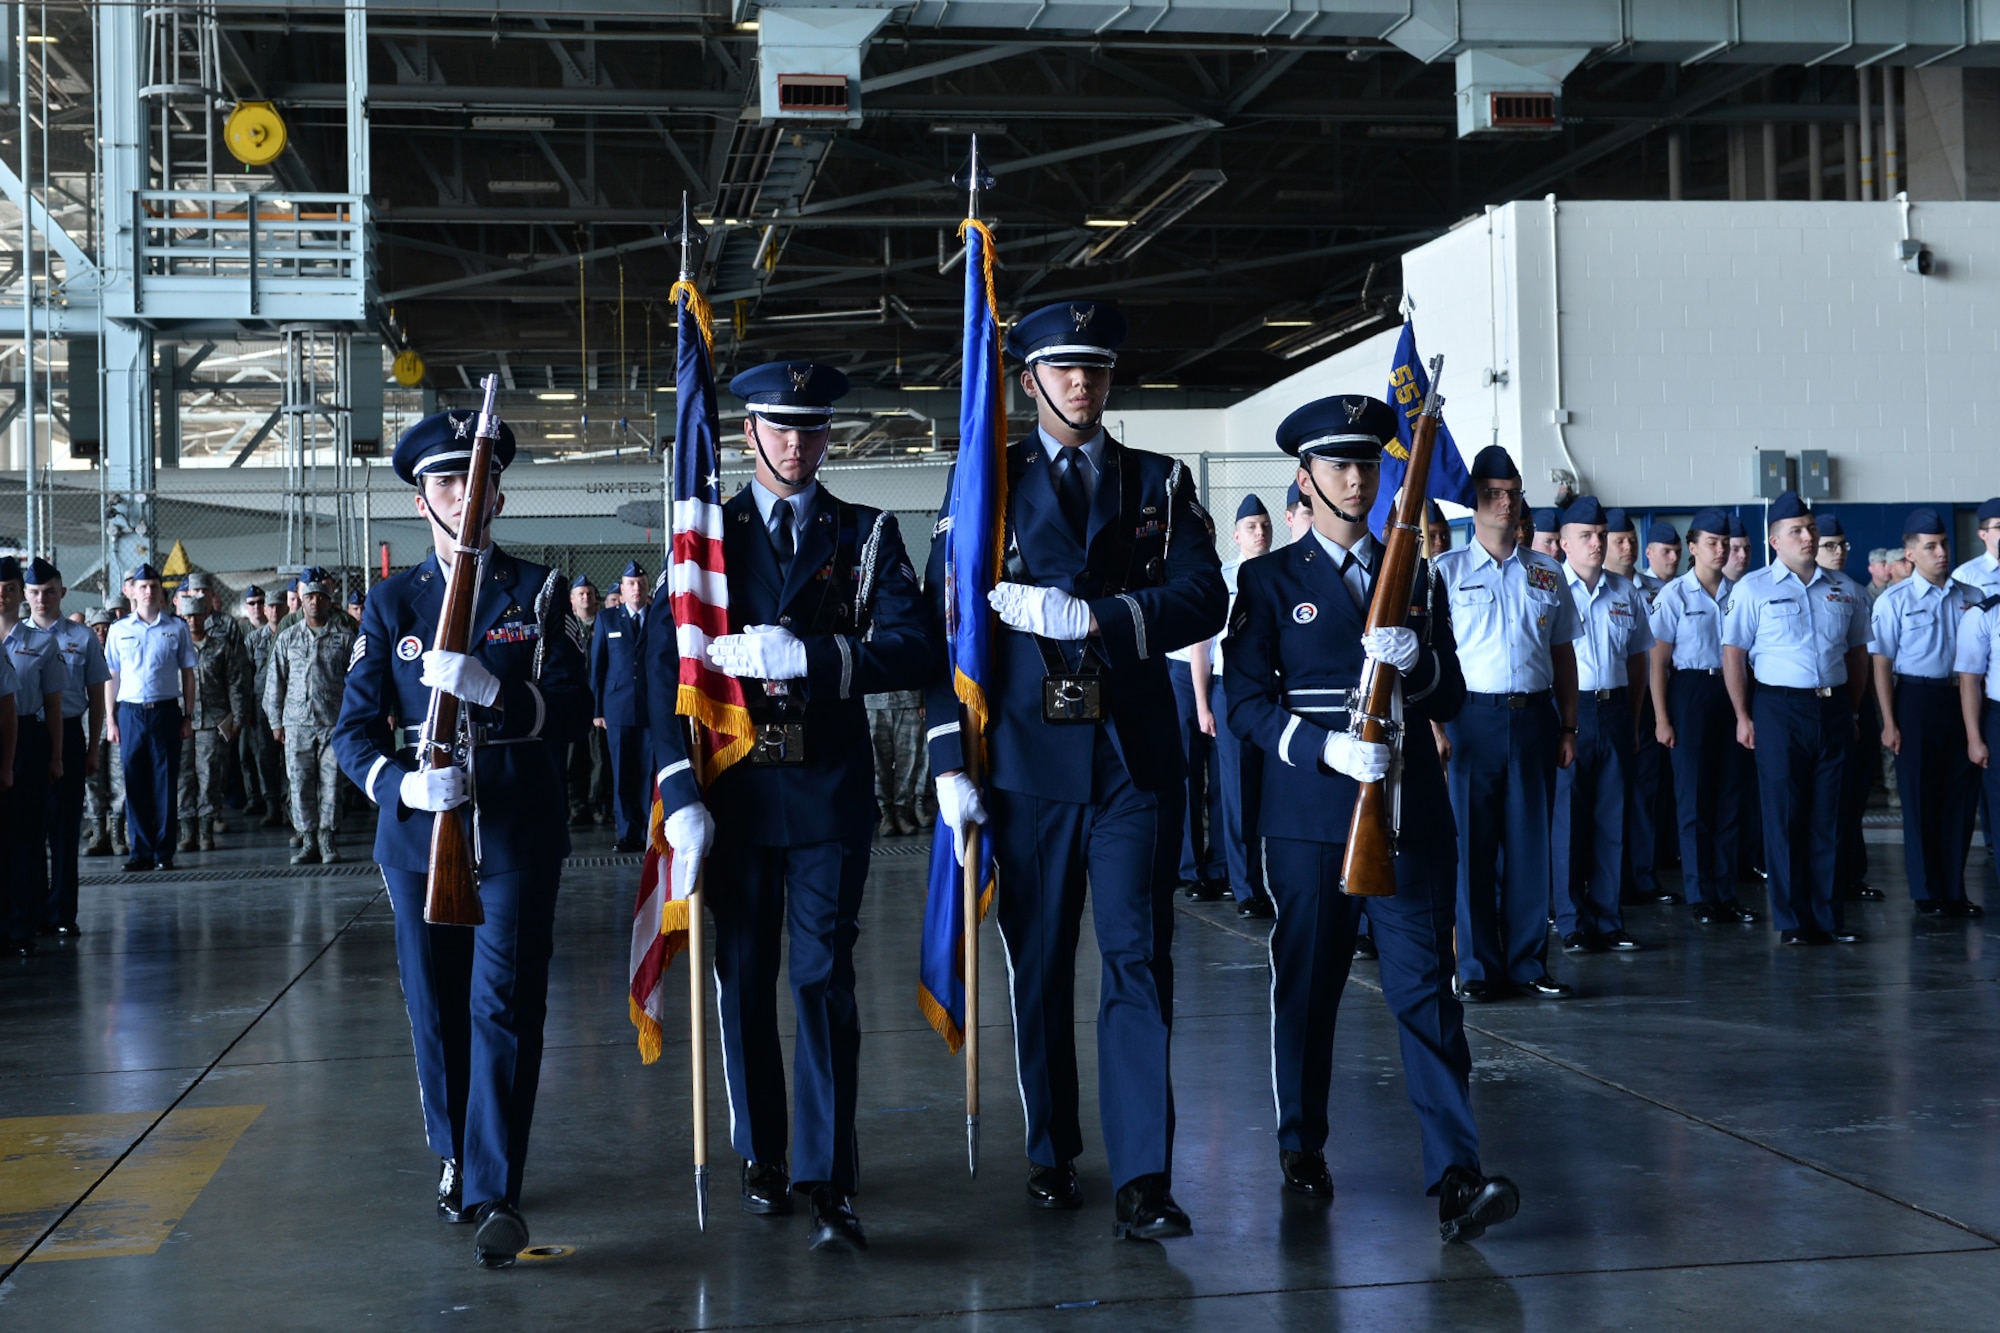 The Honor Guard presents the colors during the 55th Wing change of command ceremony in Dock 1 of the Bennie Davis Maintenance Facility on Offutt Air Force Base, Neb., June 8. The Fightin' Fifty-Fifth said farewell to Col. Marty Reynolds and welcomed Col. Michael Manion.